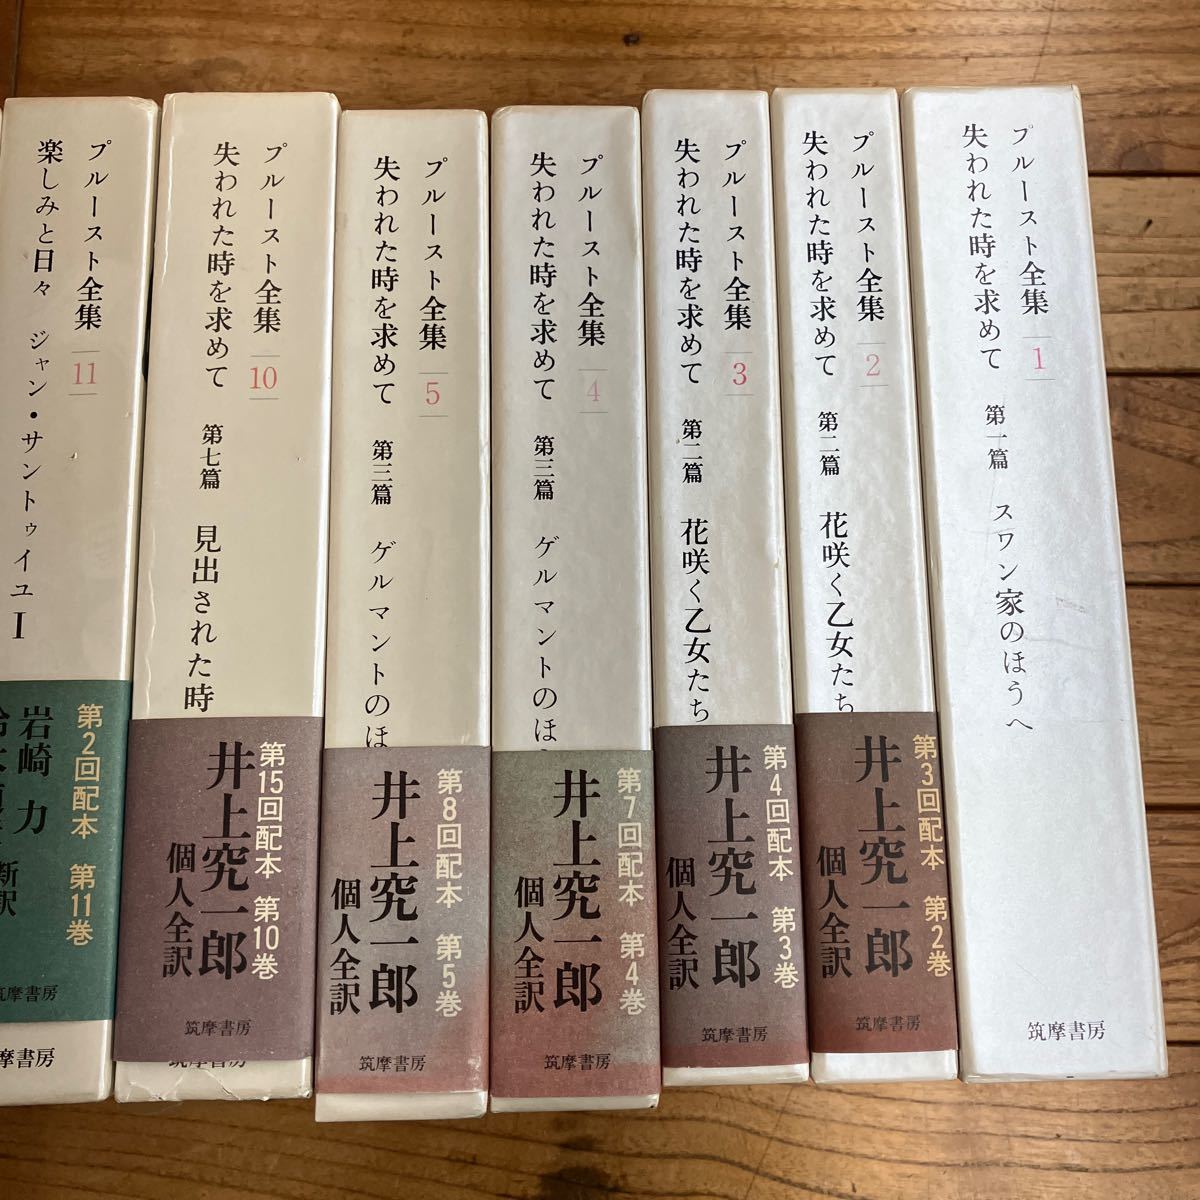 Q-ш/p loose to complete set of works don't fit 10 pcs. summarize .. bookstore . crack . hour . request . fun . every day Jean * sun tuiyu literary art commentary literary creation. around other 